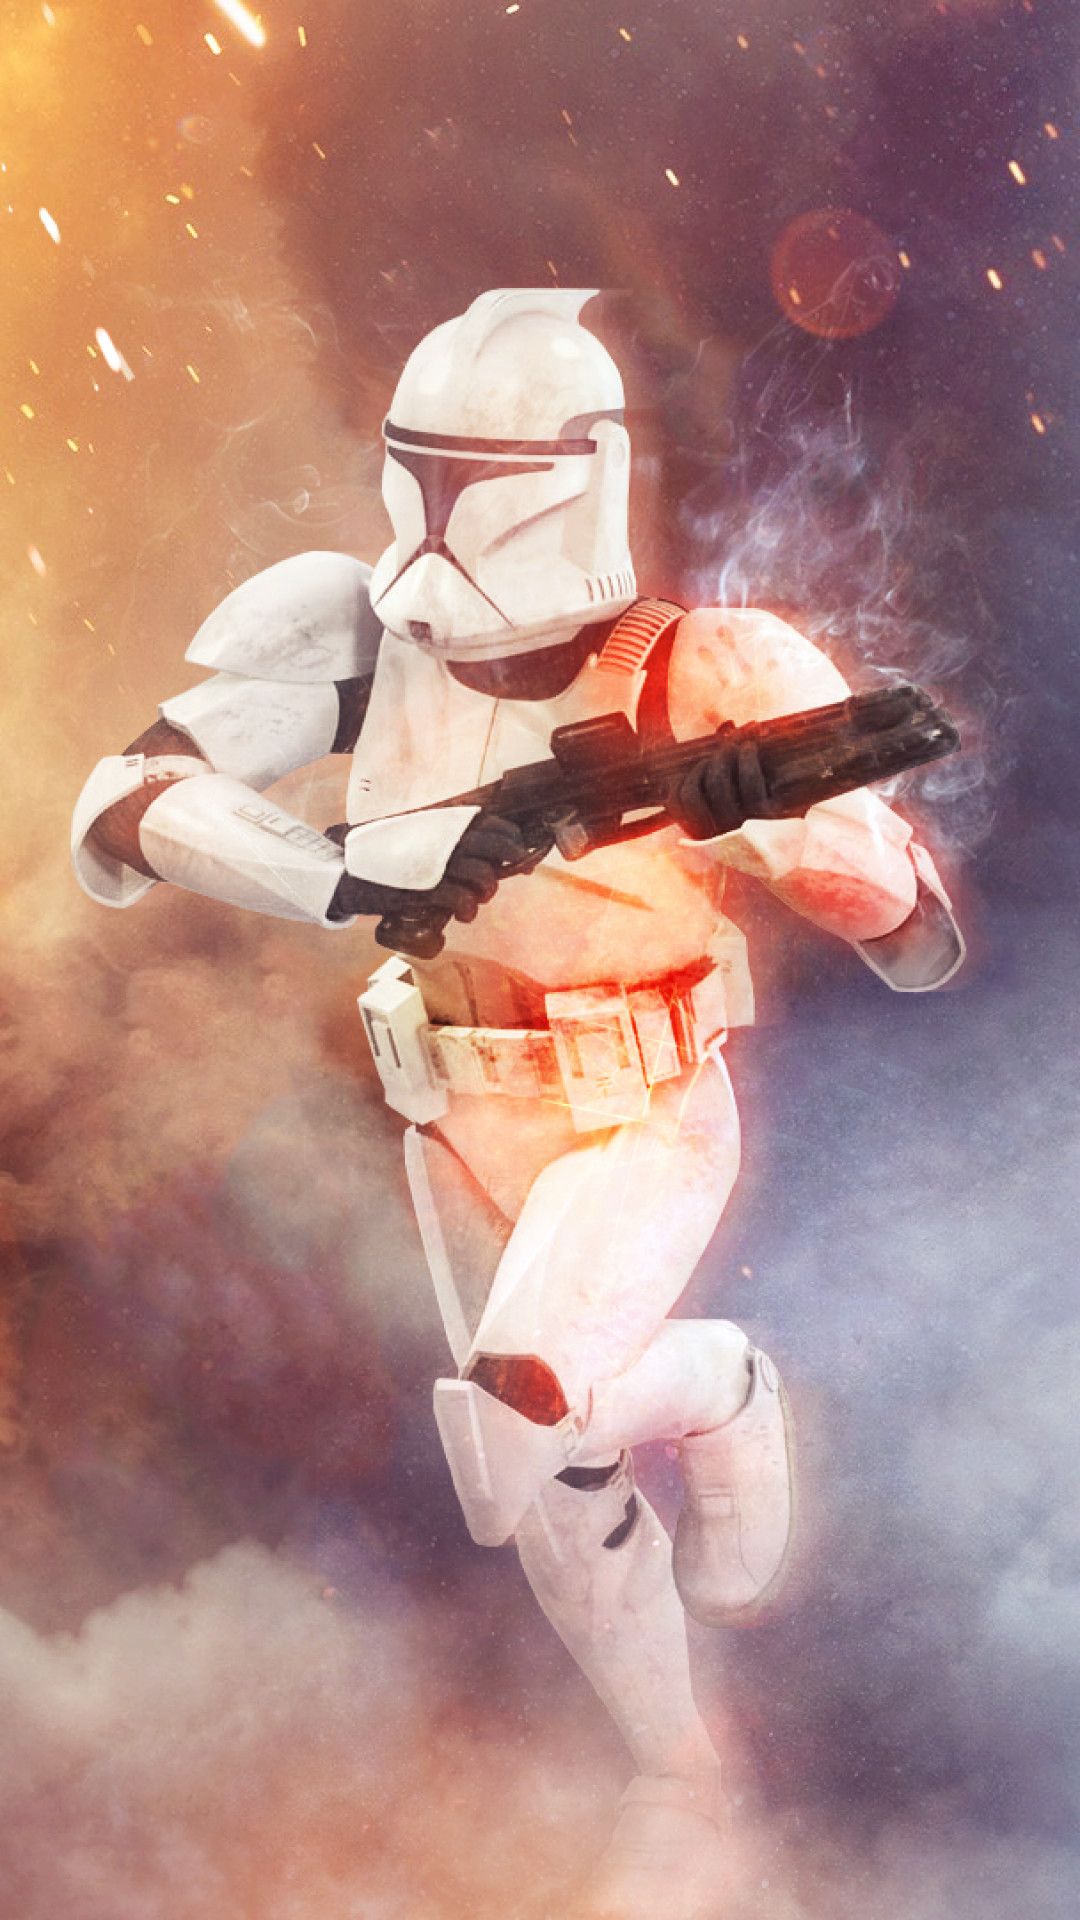 1080x1920, Amazing Backgrounds Of The Day - Star Wars Clone Trooper  Wallpaper Iphone - 1080x1920 Wallpaper 